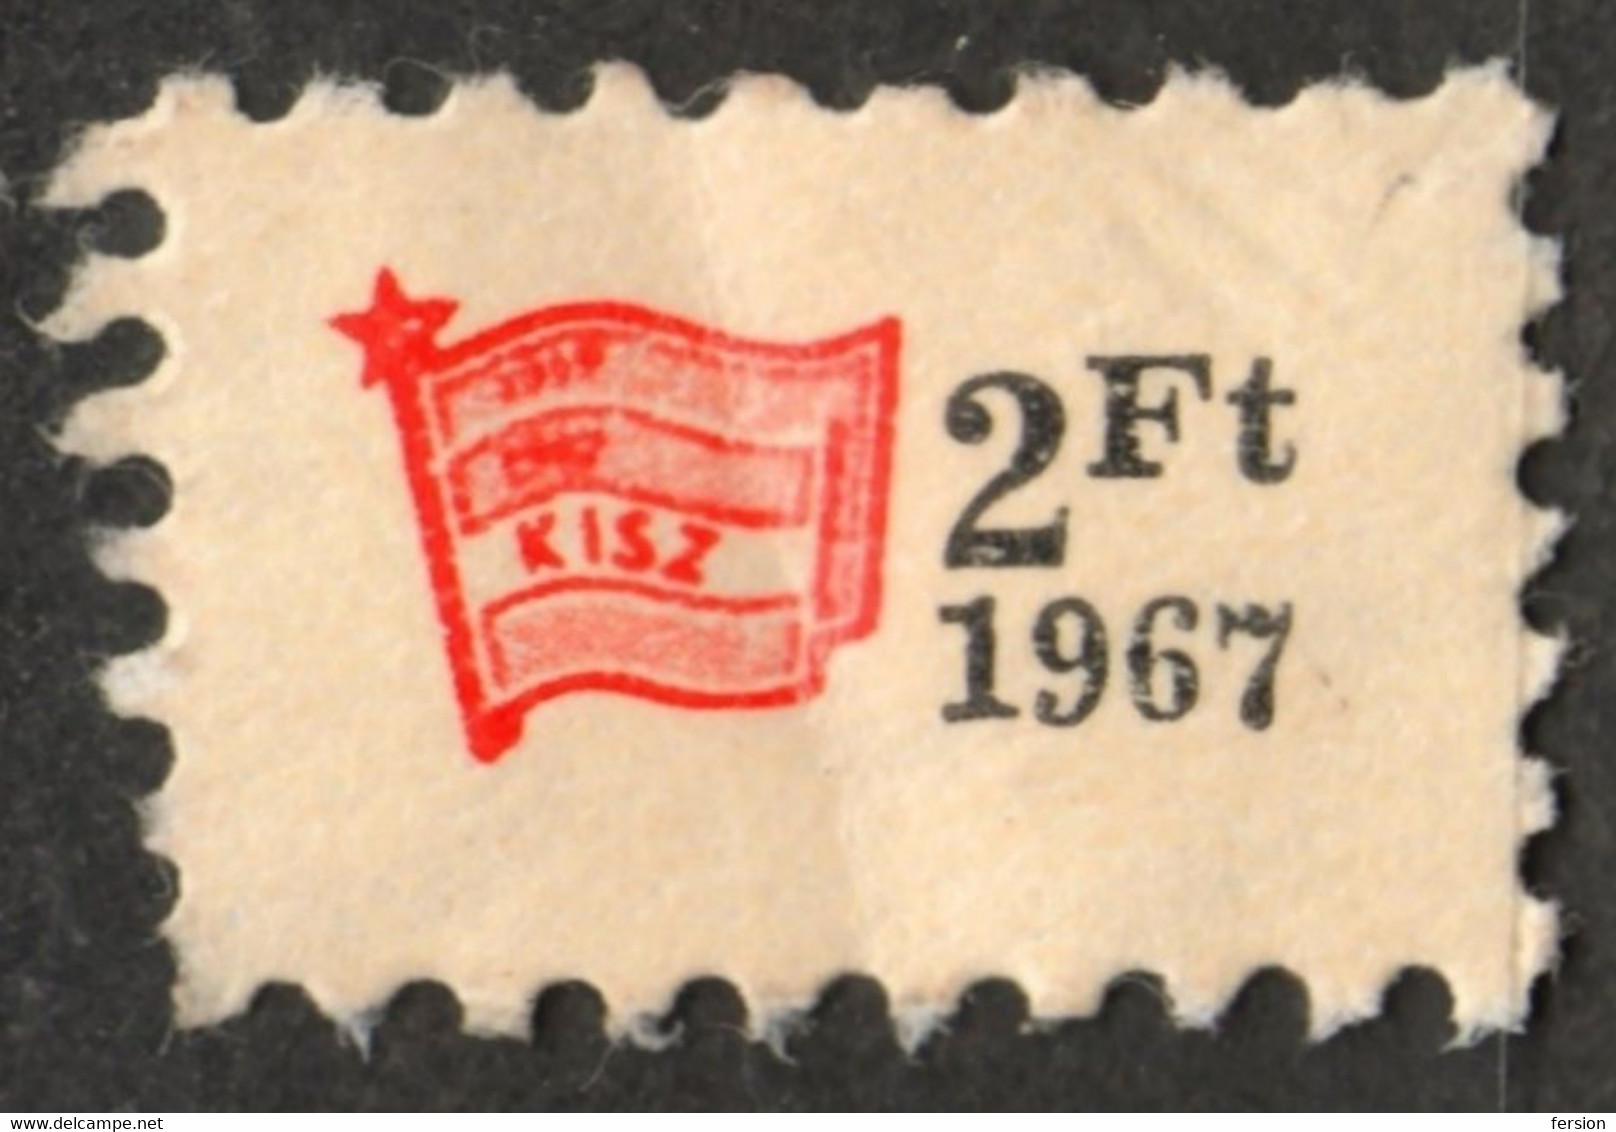 KISZ Hungarian Young Communist League FLAG Red Star - Member Charity LABEL CINDERELLA VIGNETTE - Hungary 1967 - Officials